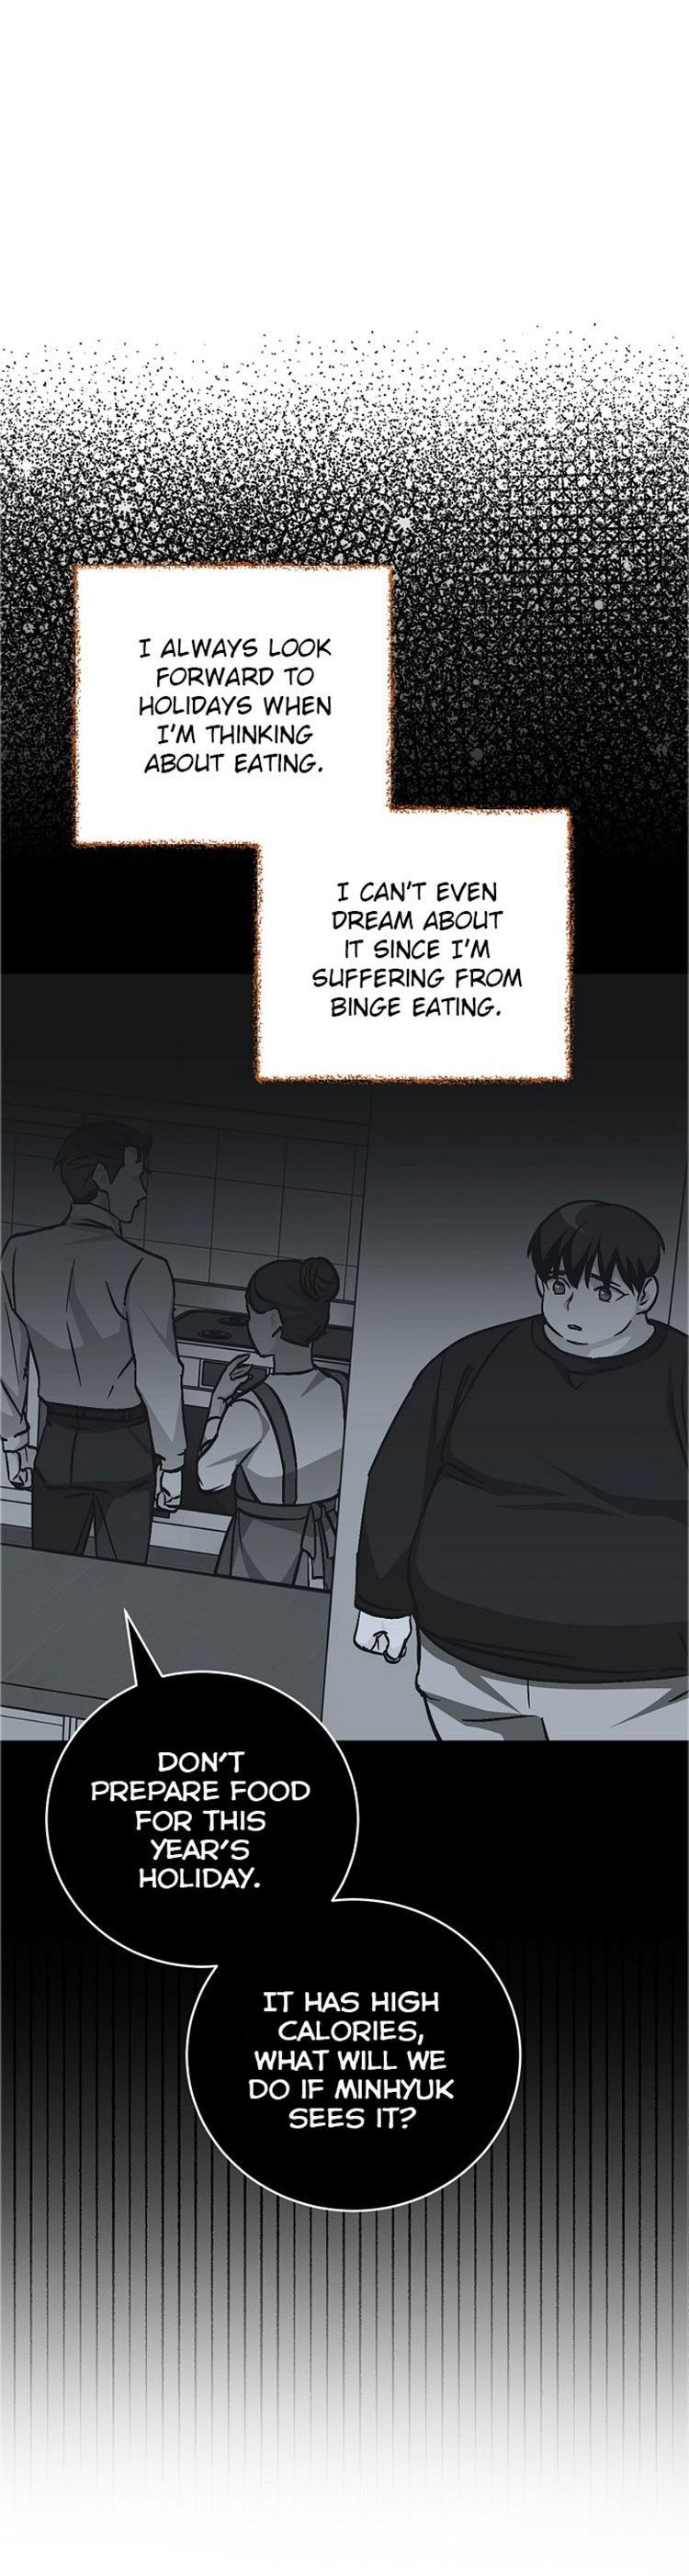 Levelling Up, By Only Eating! Chapter 35 page 28